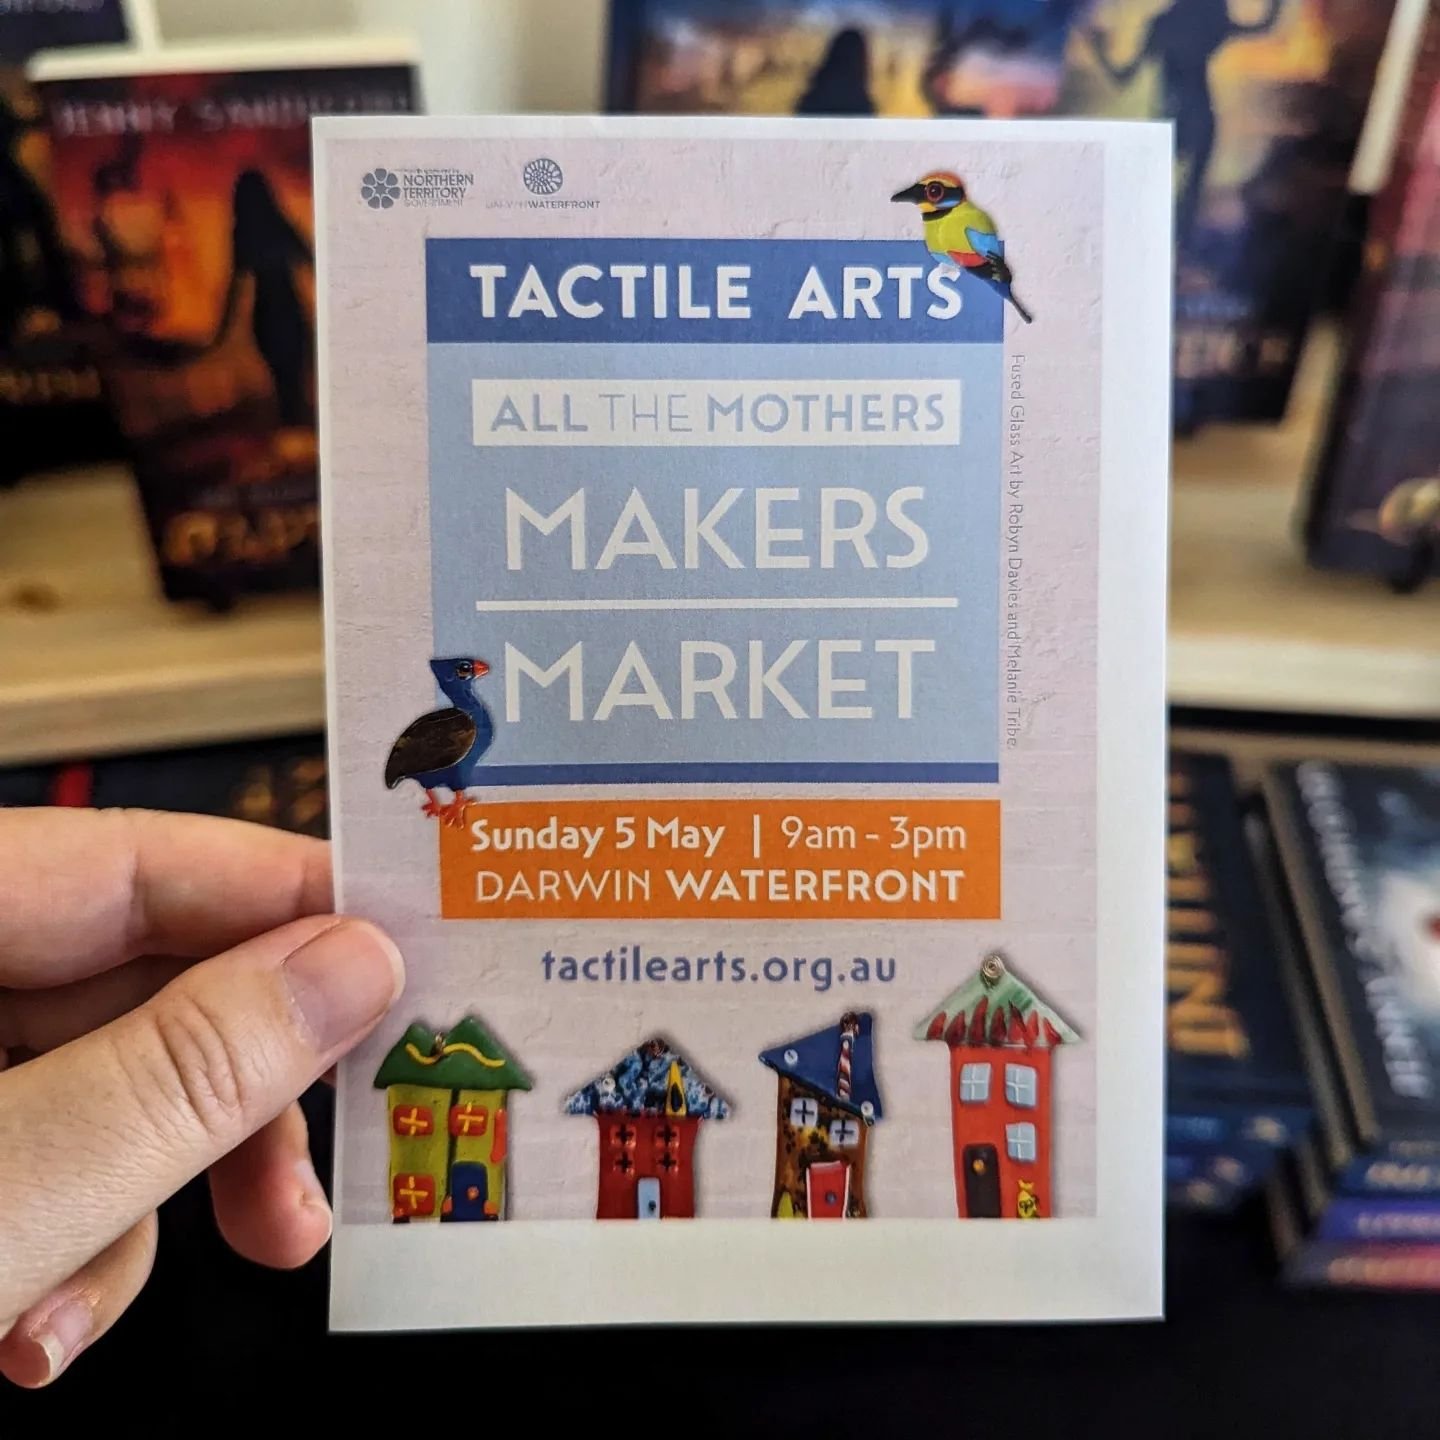 Hello to anyone in Darwin, Australia!

I&rsquo;ll be selling books from The Shadow Atlas series and some bookmarks I made down at the Tactile Art&rsquo;s Makers Market on Sunday if you want to stop in and say hello or buy a book or a bookmark 🙂

📍W